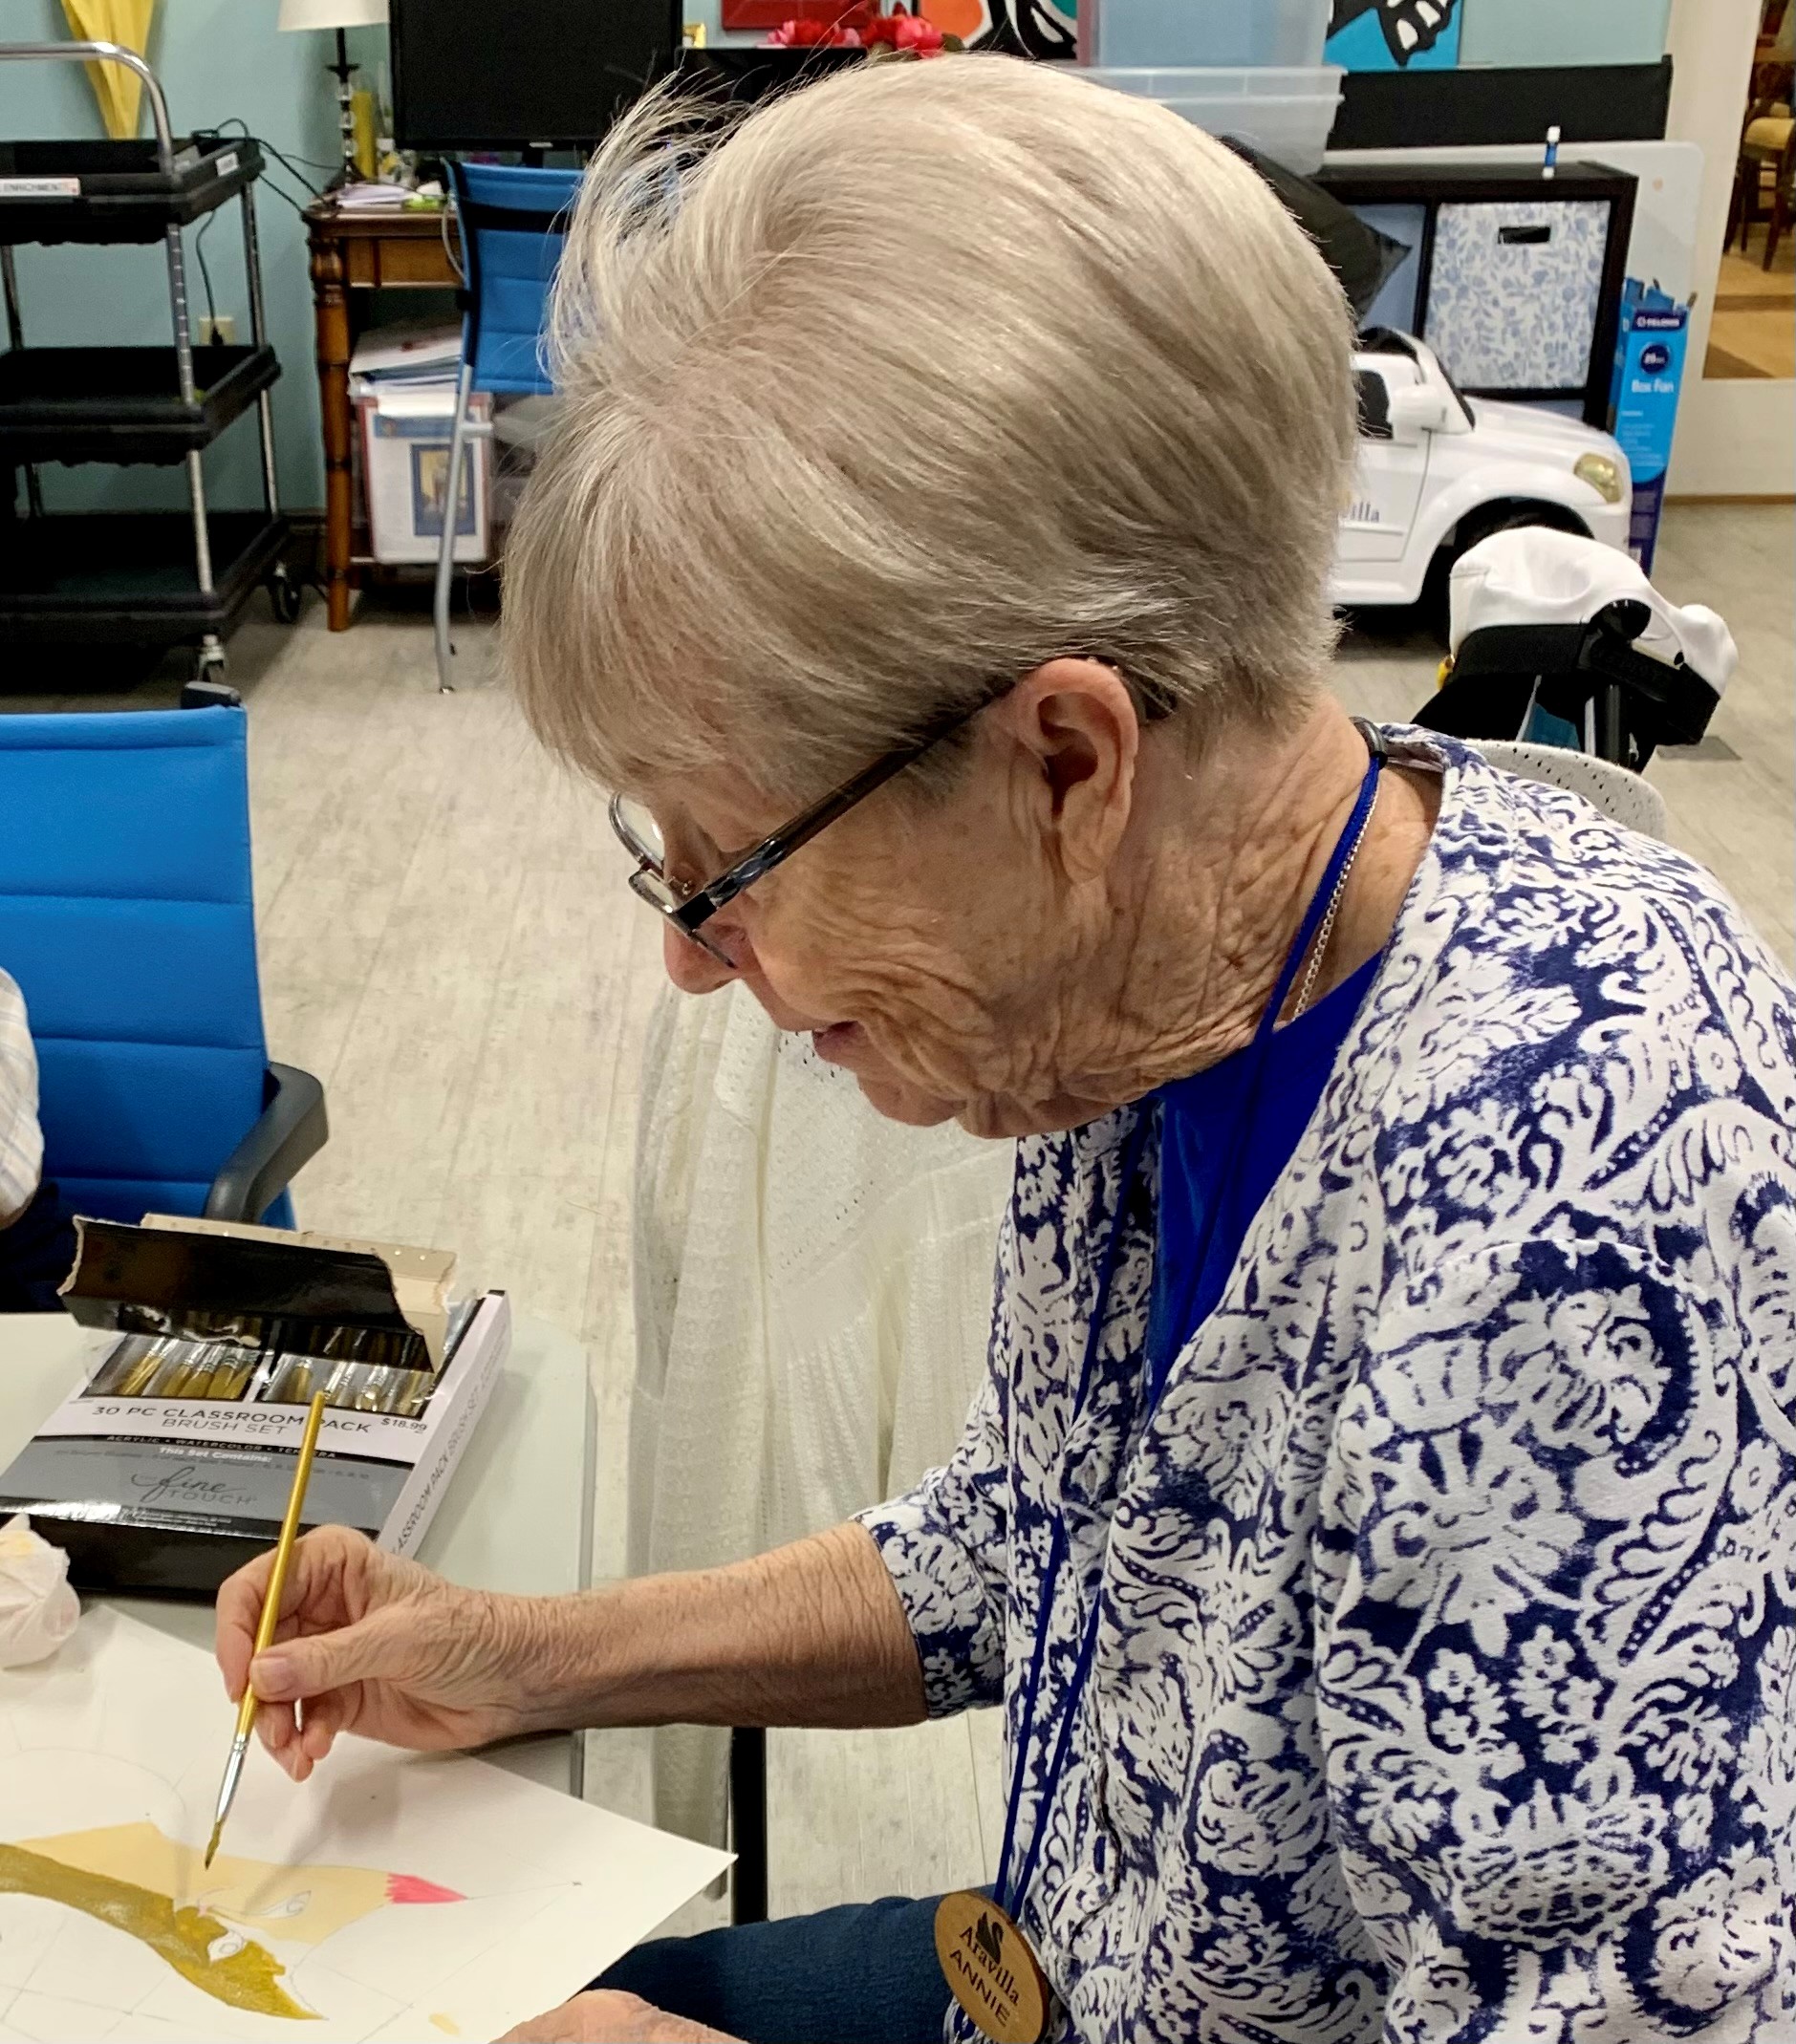 assisted living activities for seniors - Annie is studying watercolors